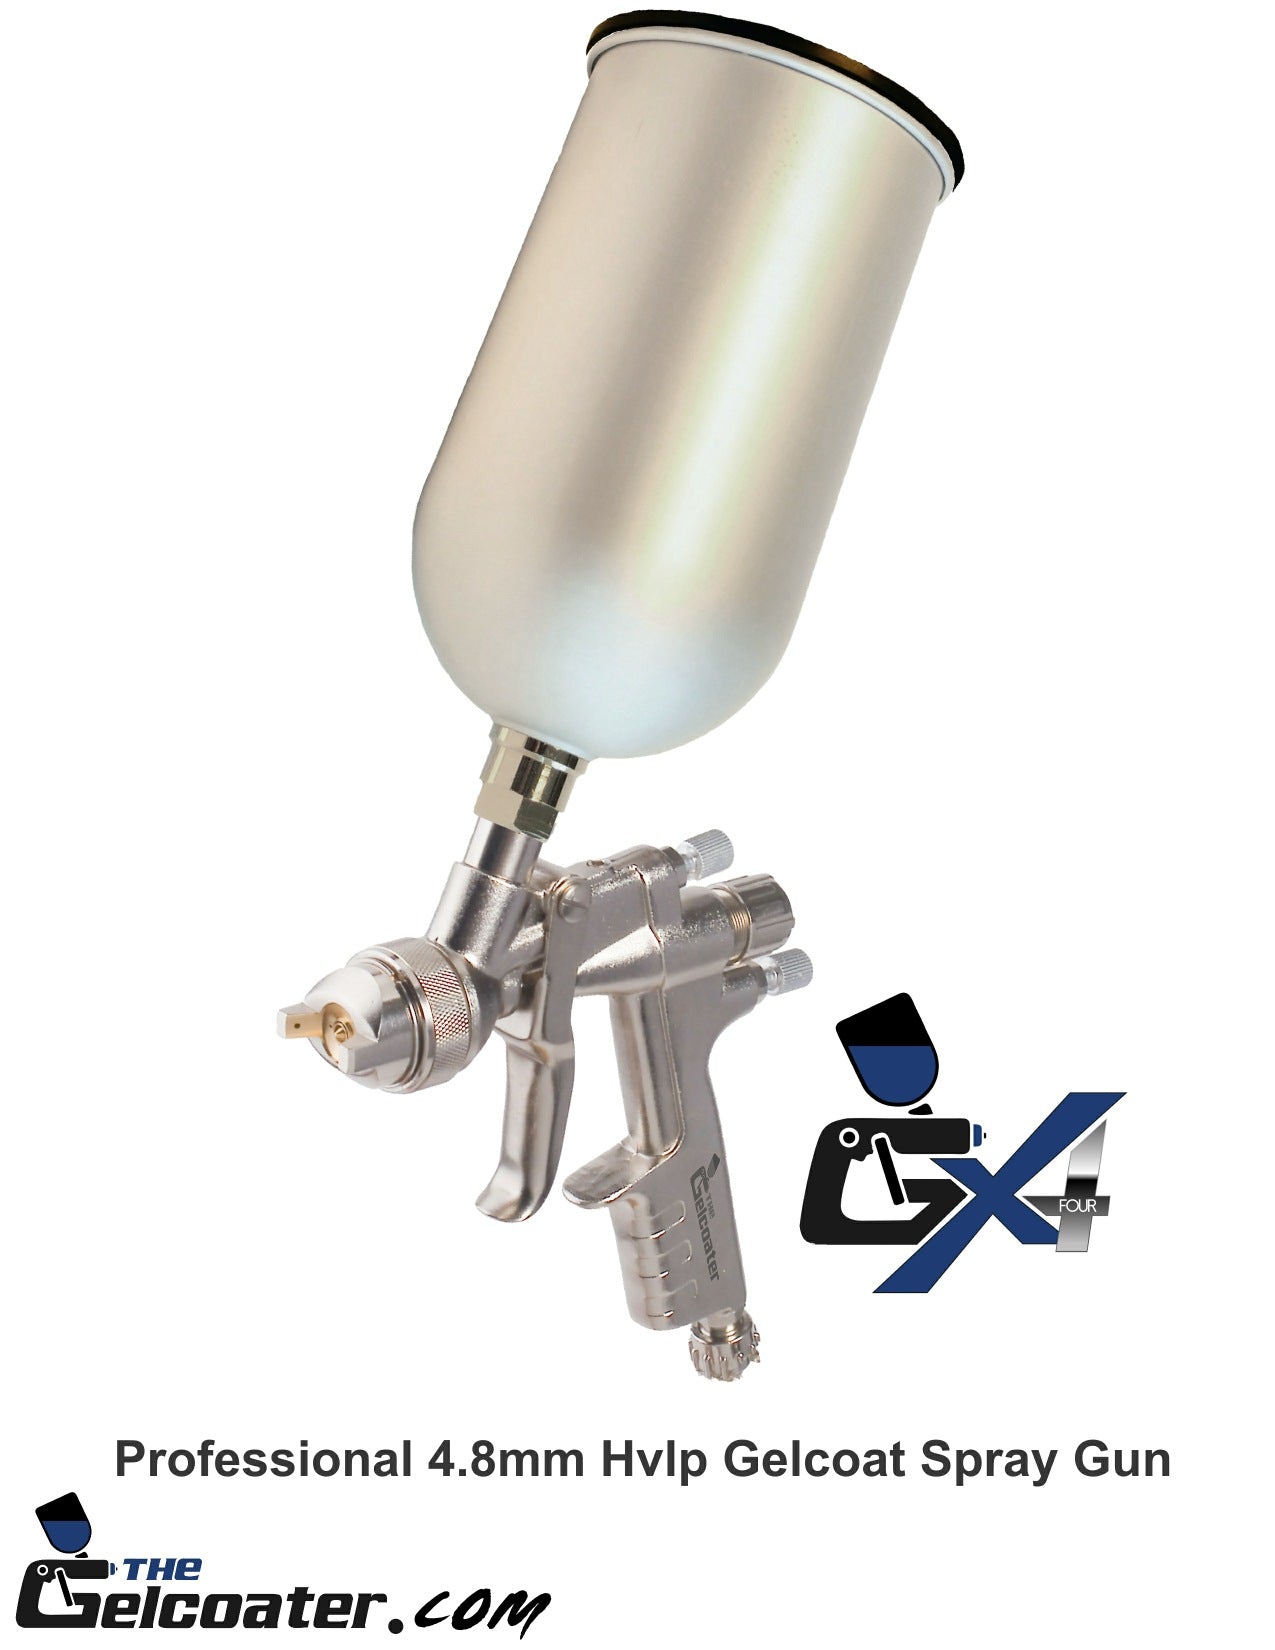 The GX4 HVLP Gelcoat and Resin Spray Gun with 4.8mm Nozzle